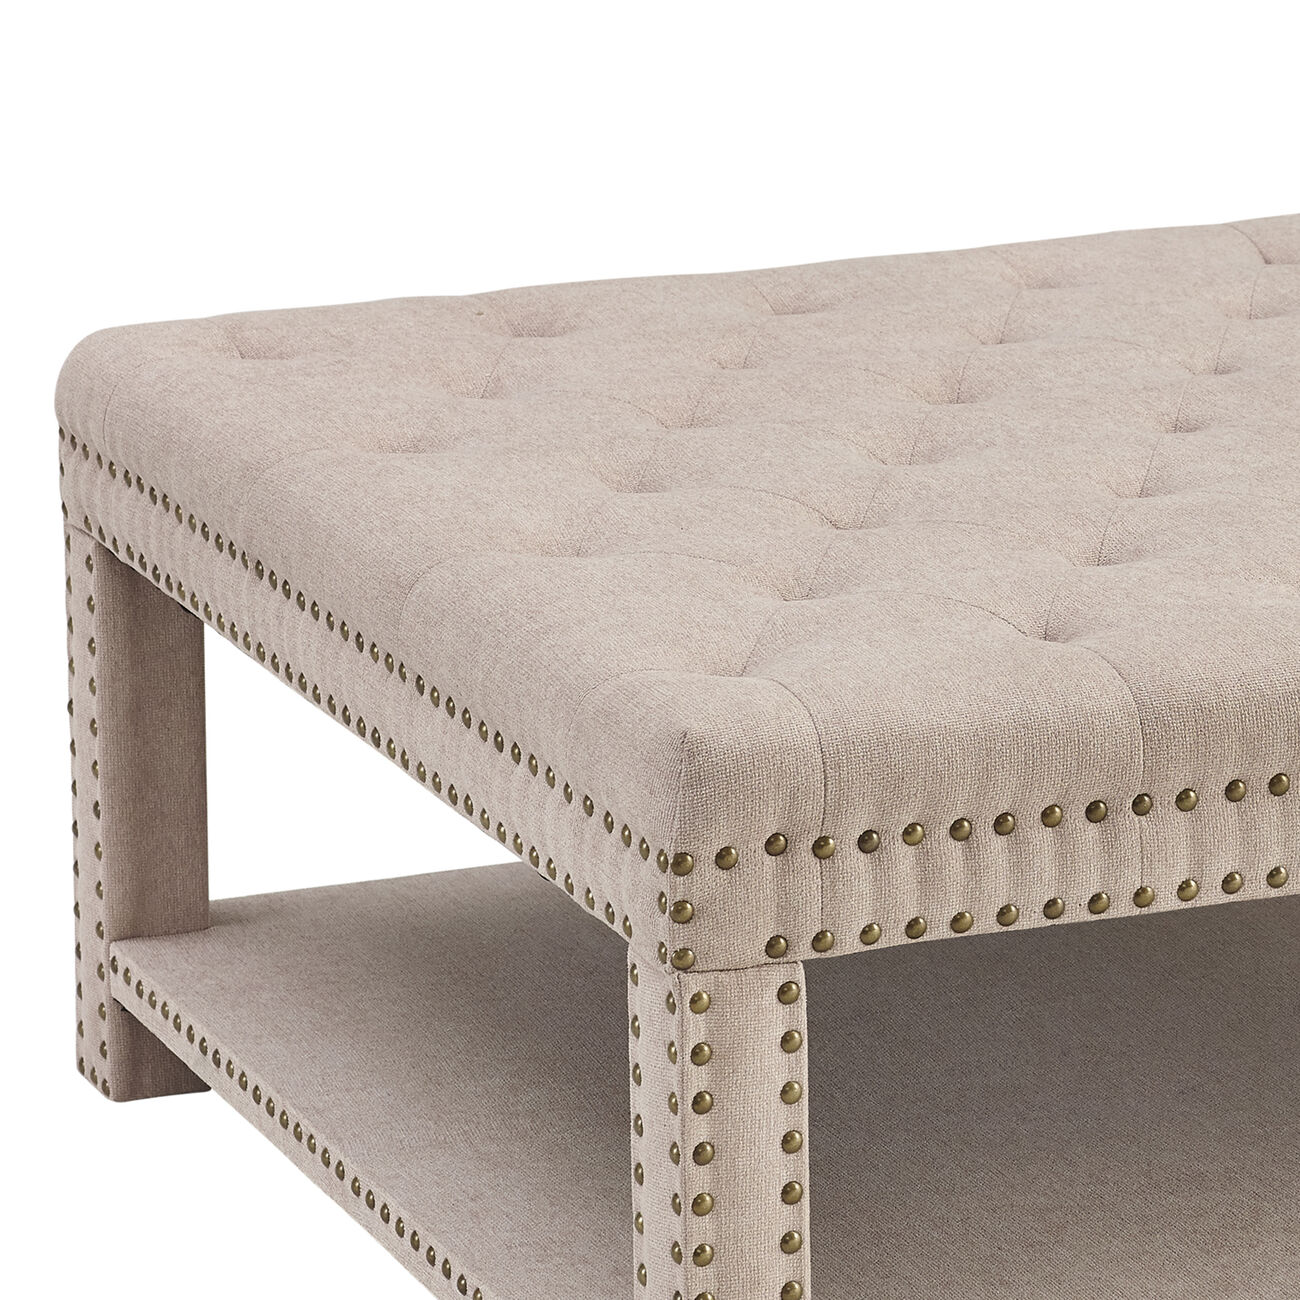 Fabric Upholstered Square Wooden Coffee Table with Nailhead Trim,Beige